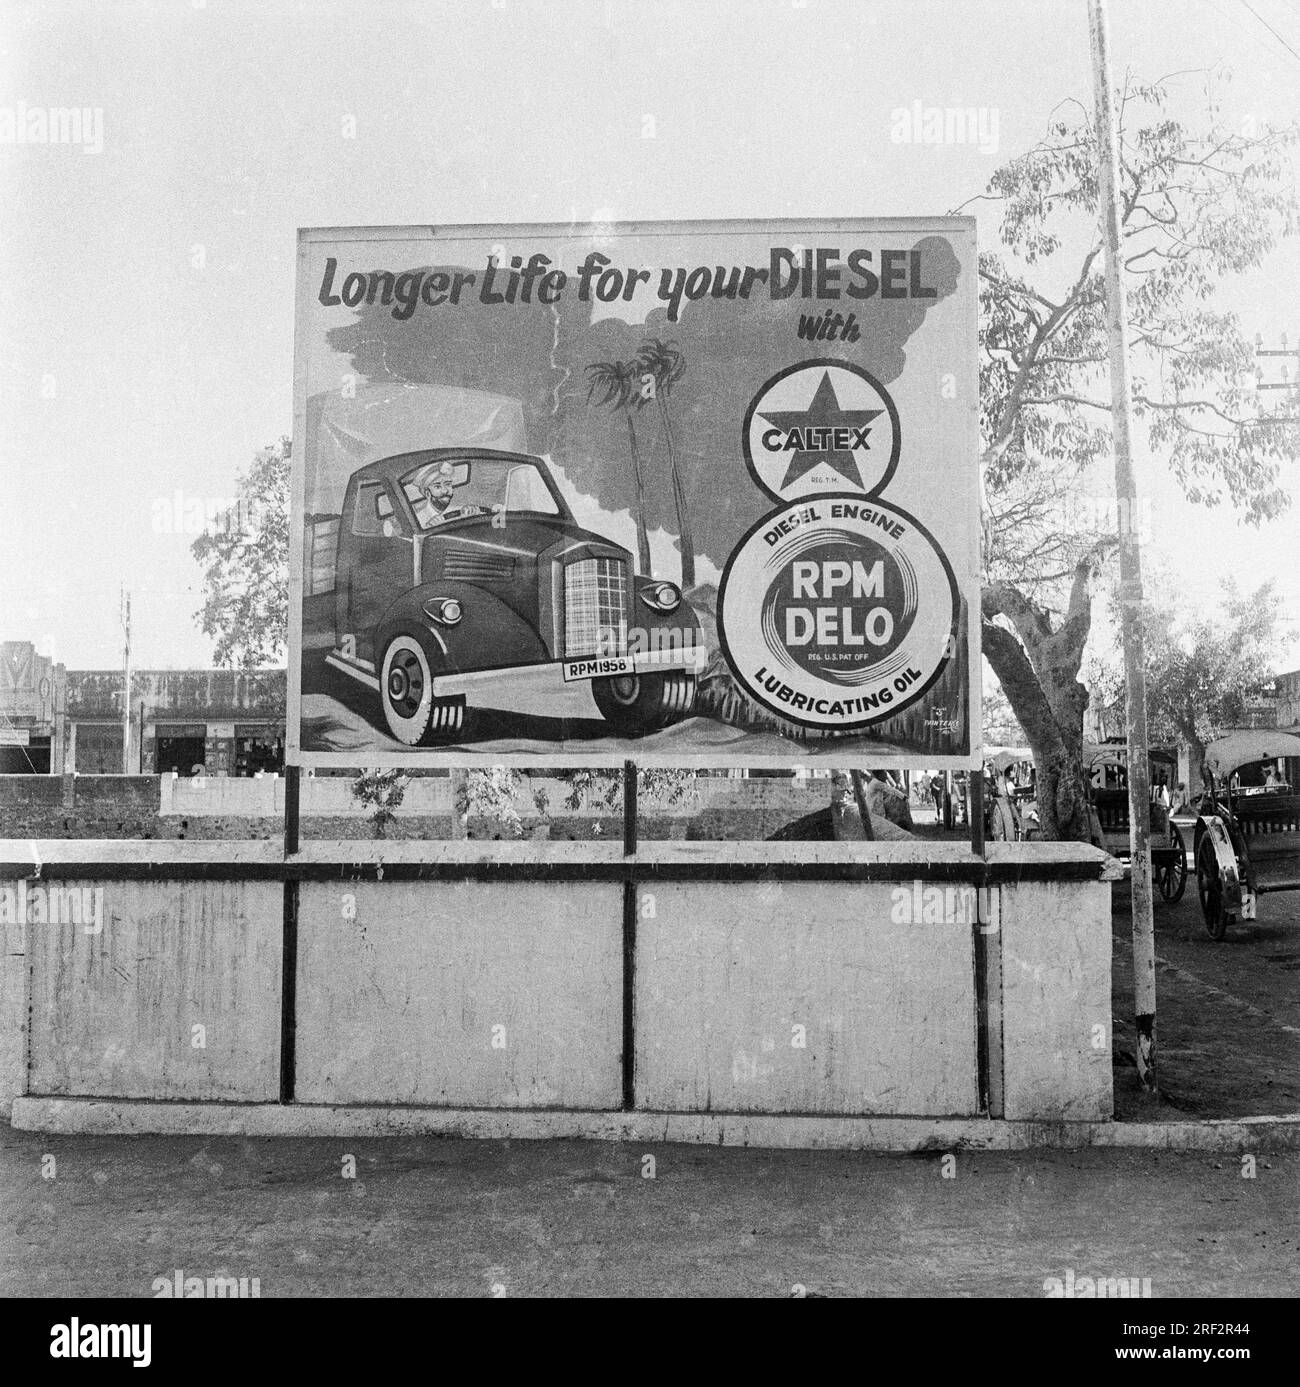 old vintage 1900s black and white picture of Caltex hoarding Longer Life for your Diesel RPM Delo lubricating oil India Stock Photo